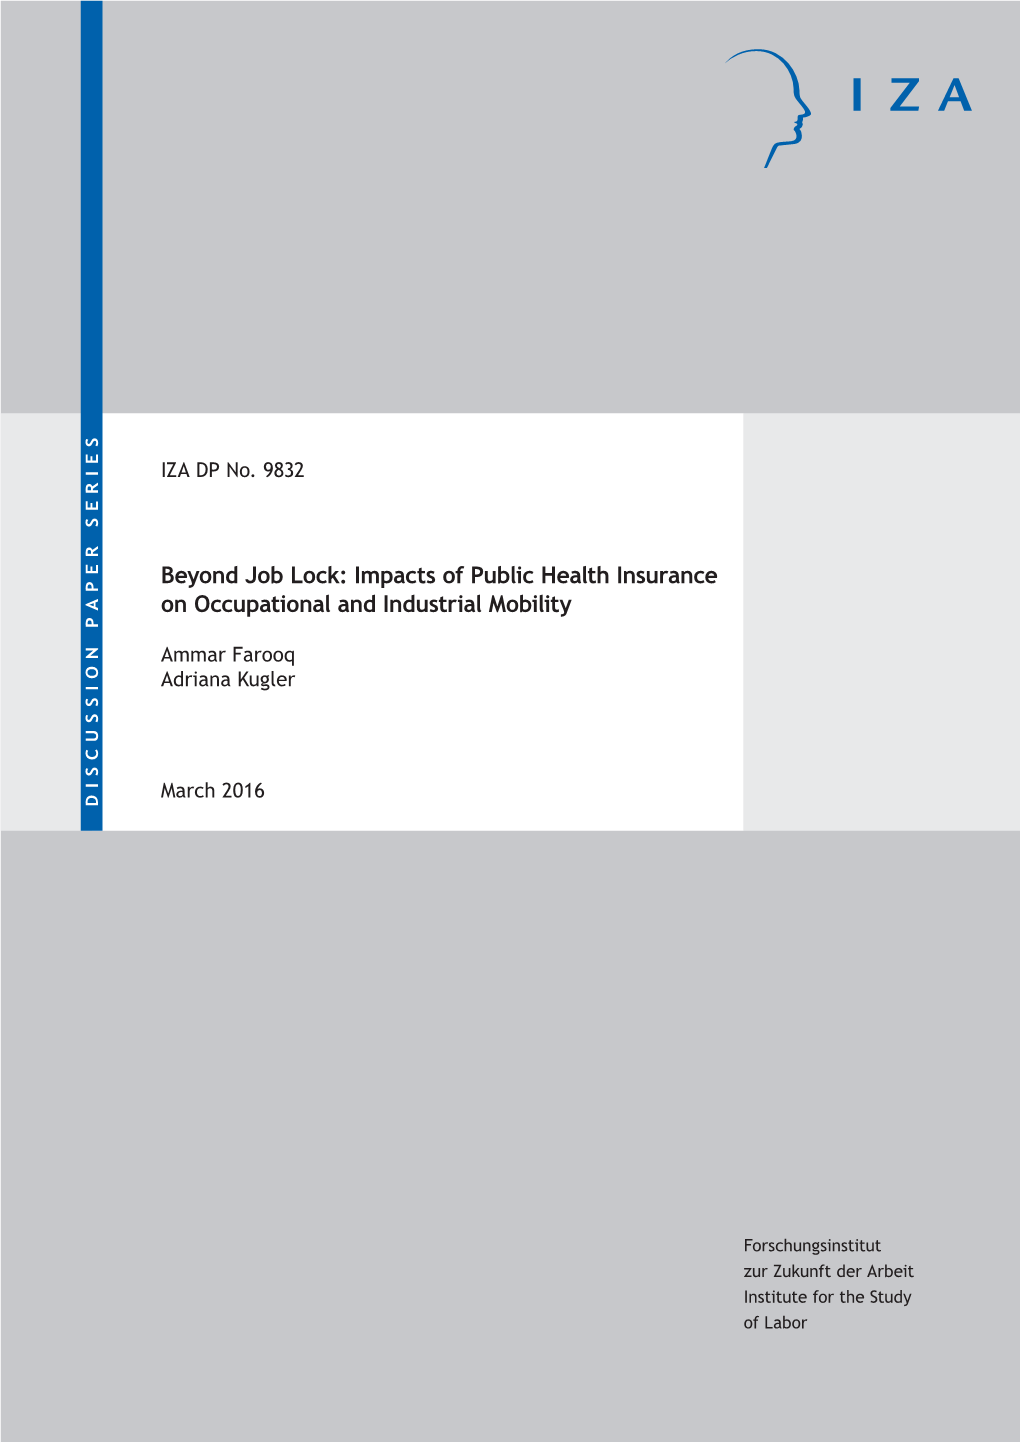 Job Lock: Impacts of Public Health Insurance on Occupational and Industrial Mobility